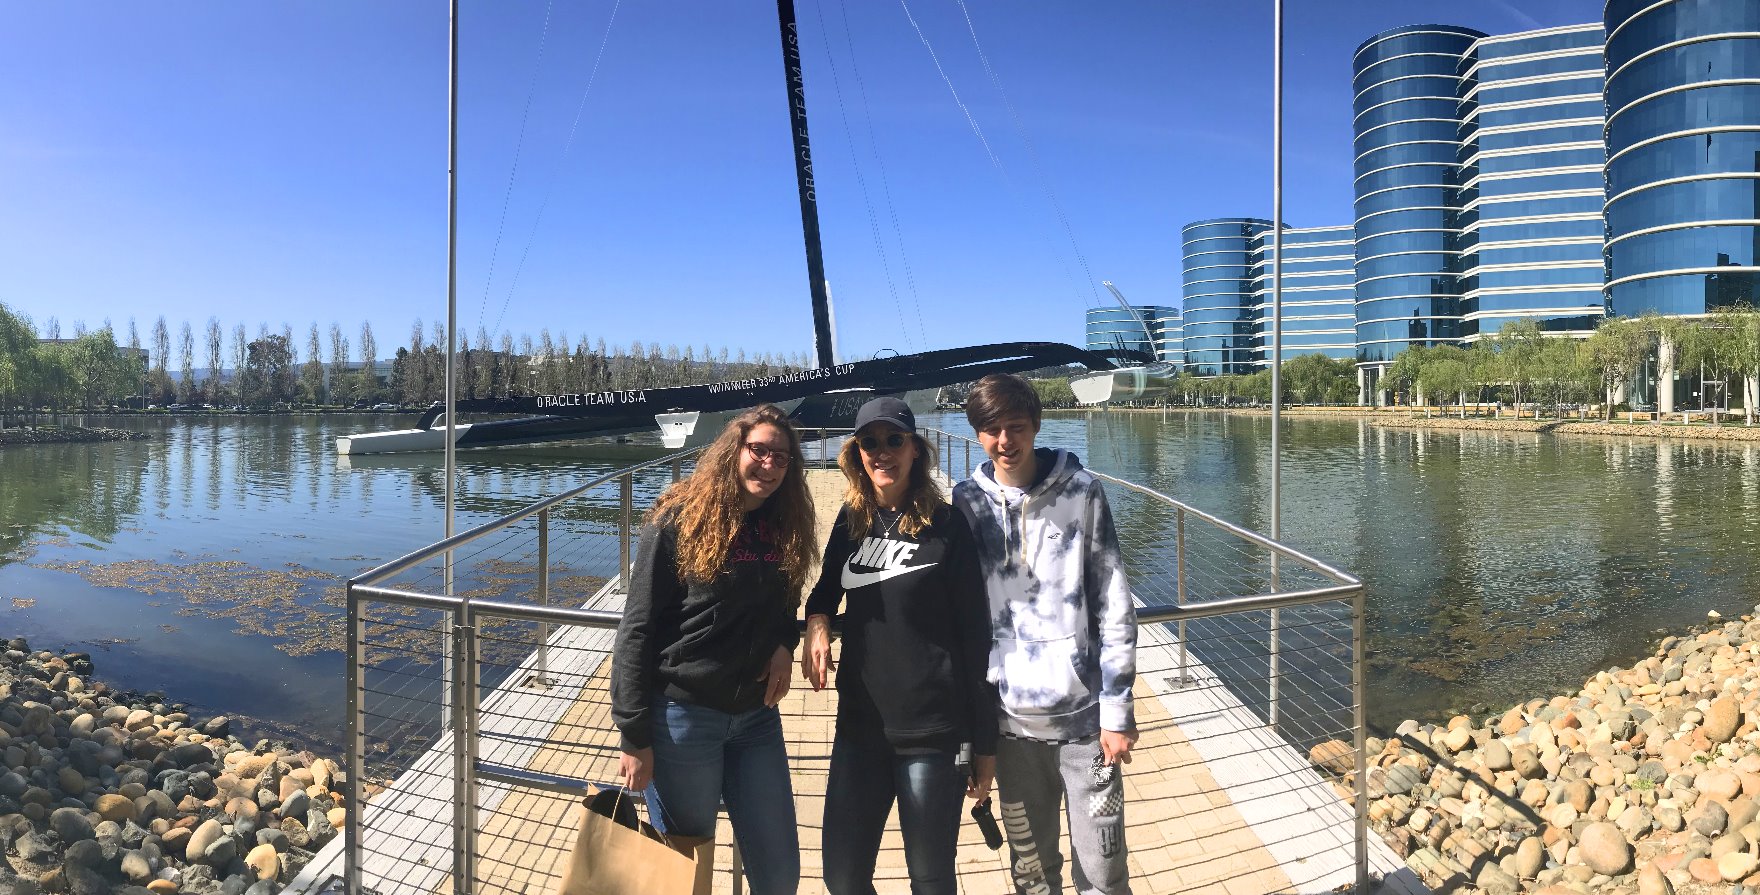 Day group trips to Silicon Valley and Excursions oracle HQ